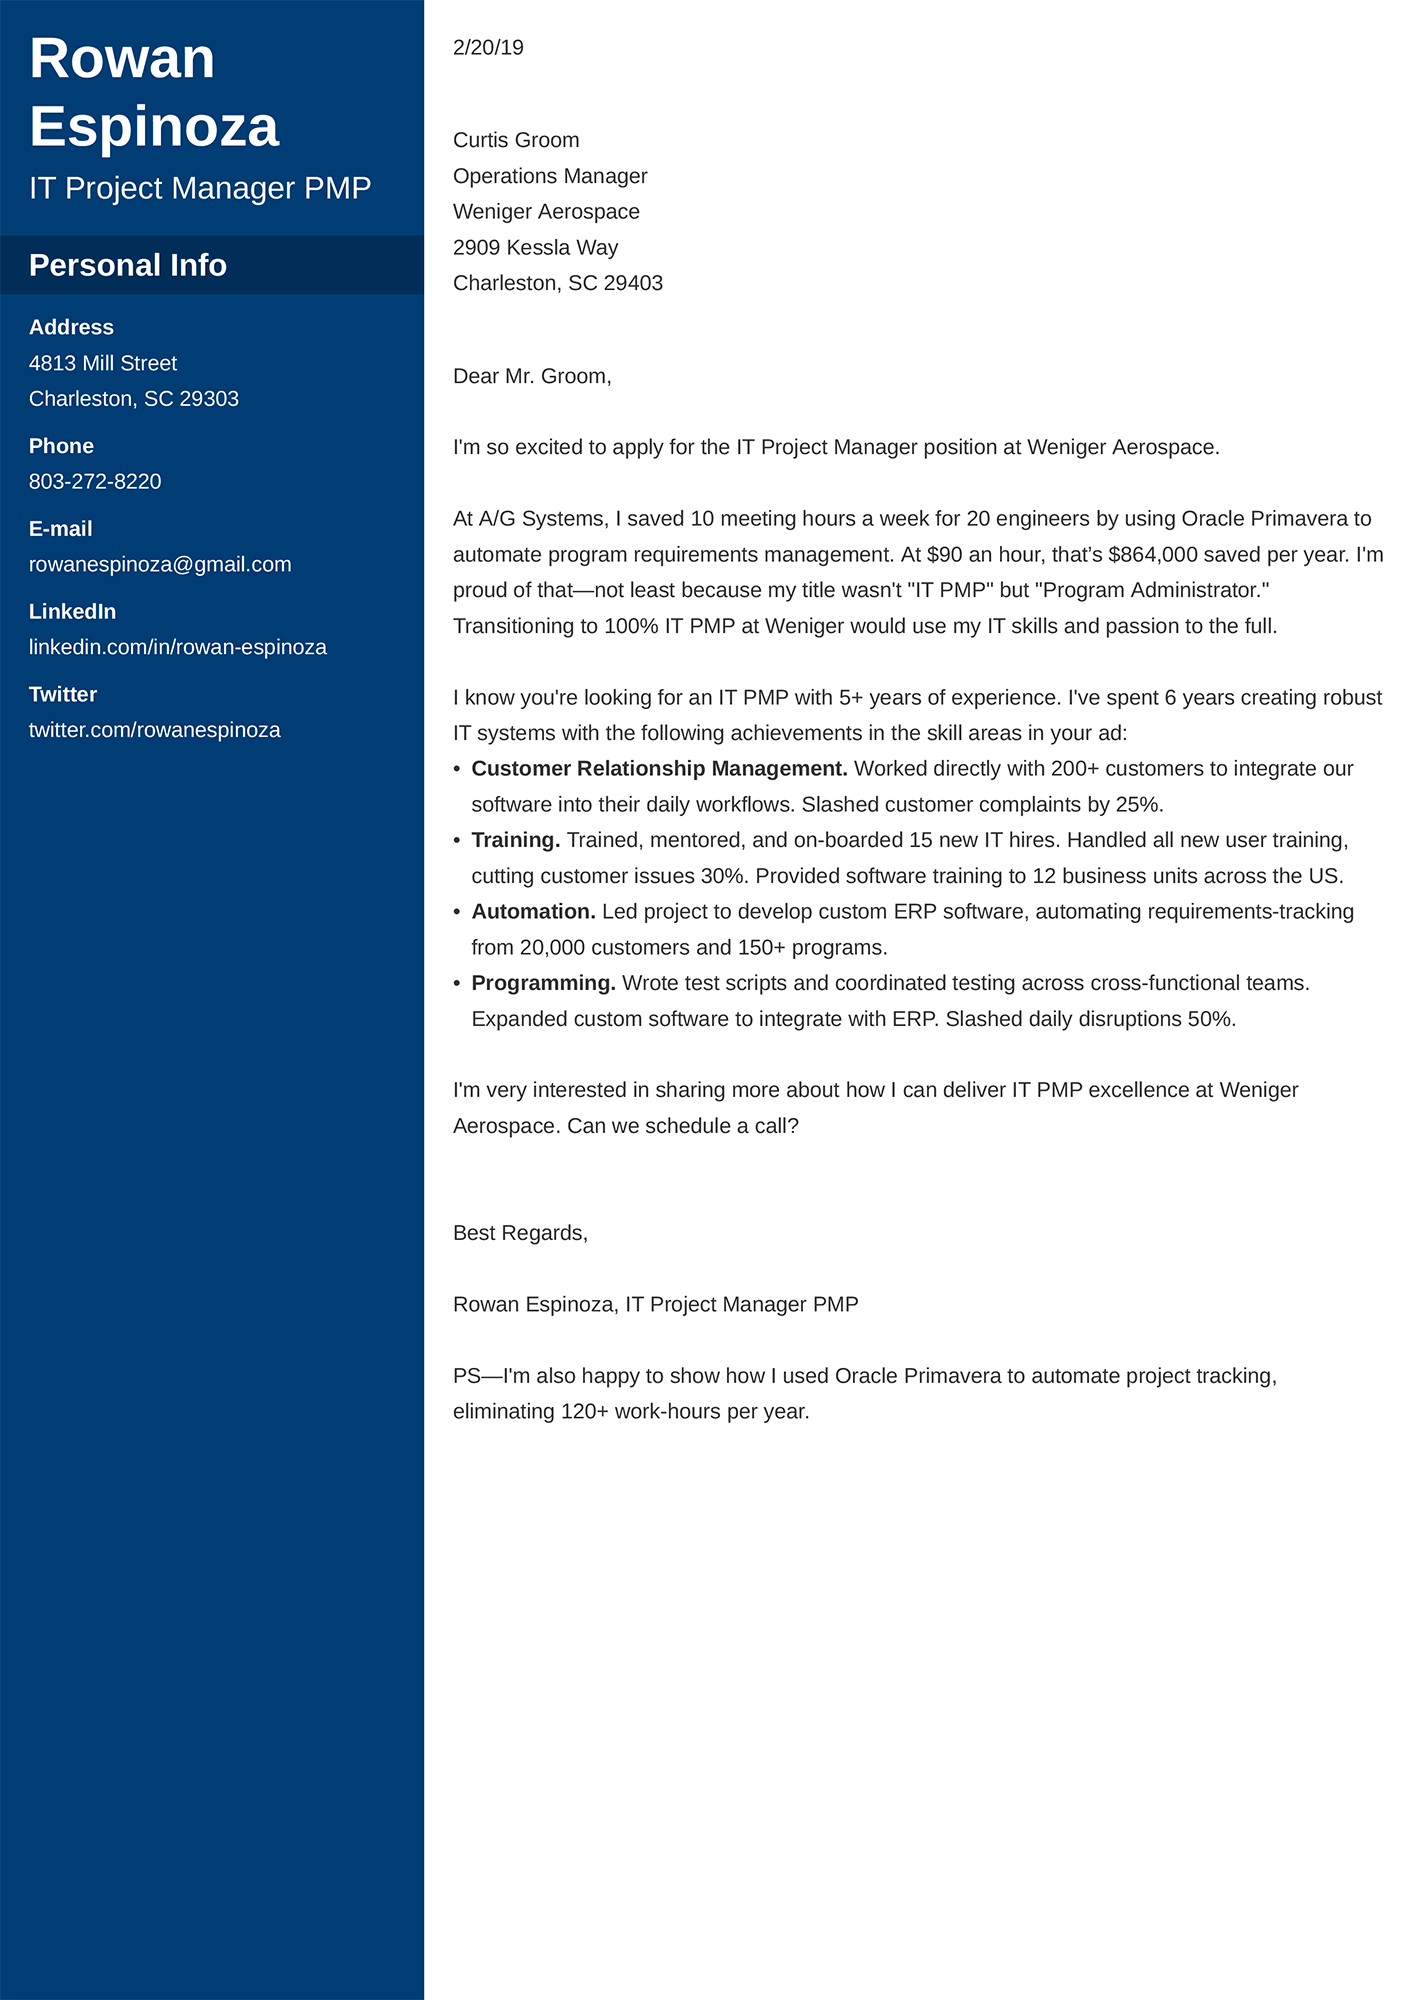 Resume Cover Letter Examples 2018 from cdn-images.zety.com